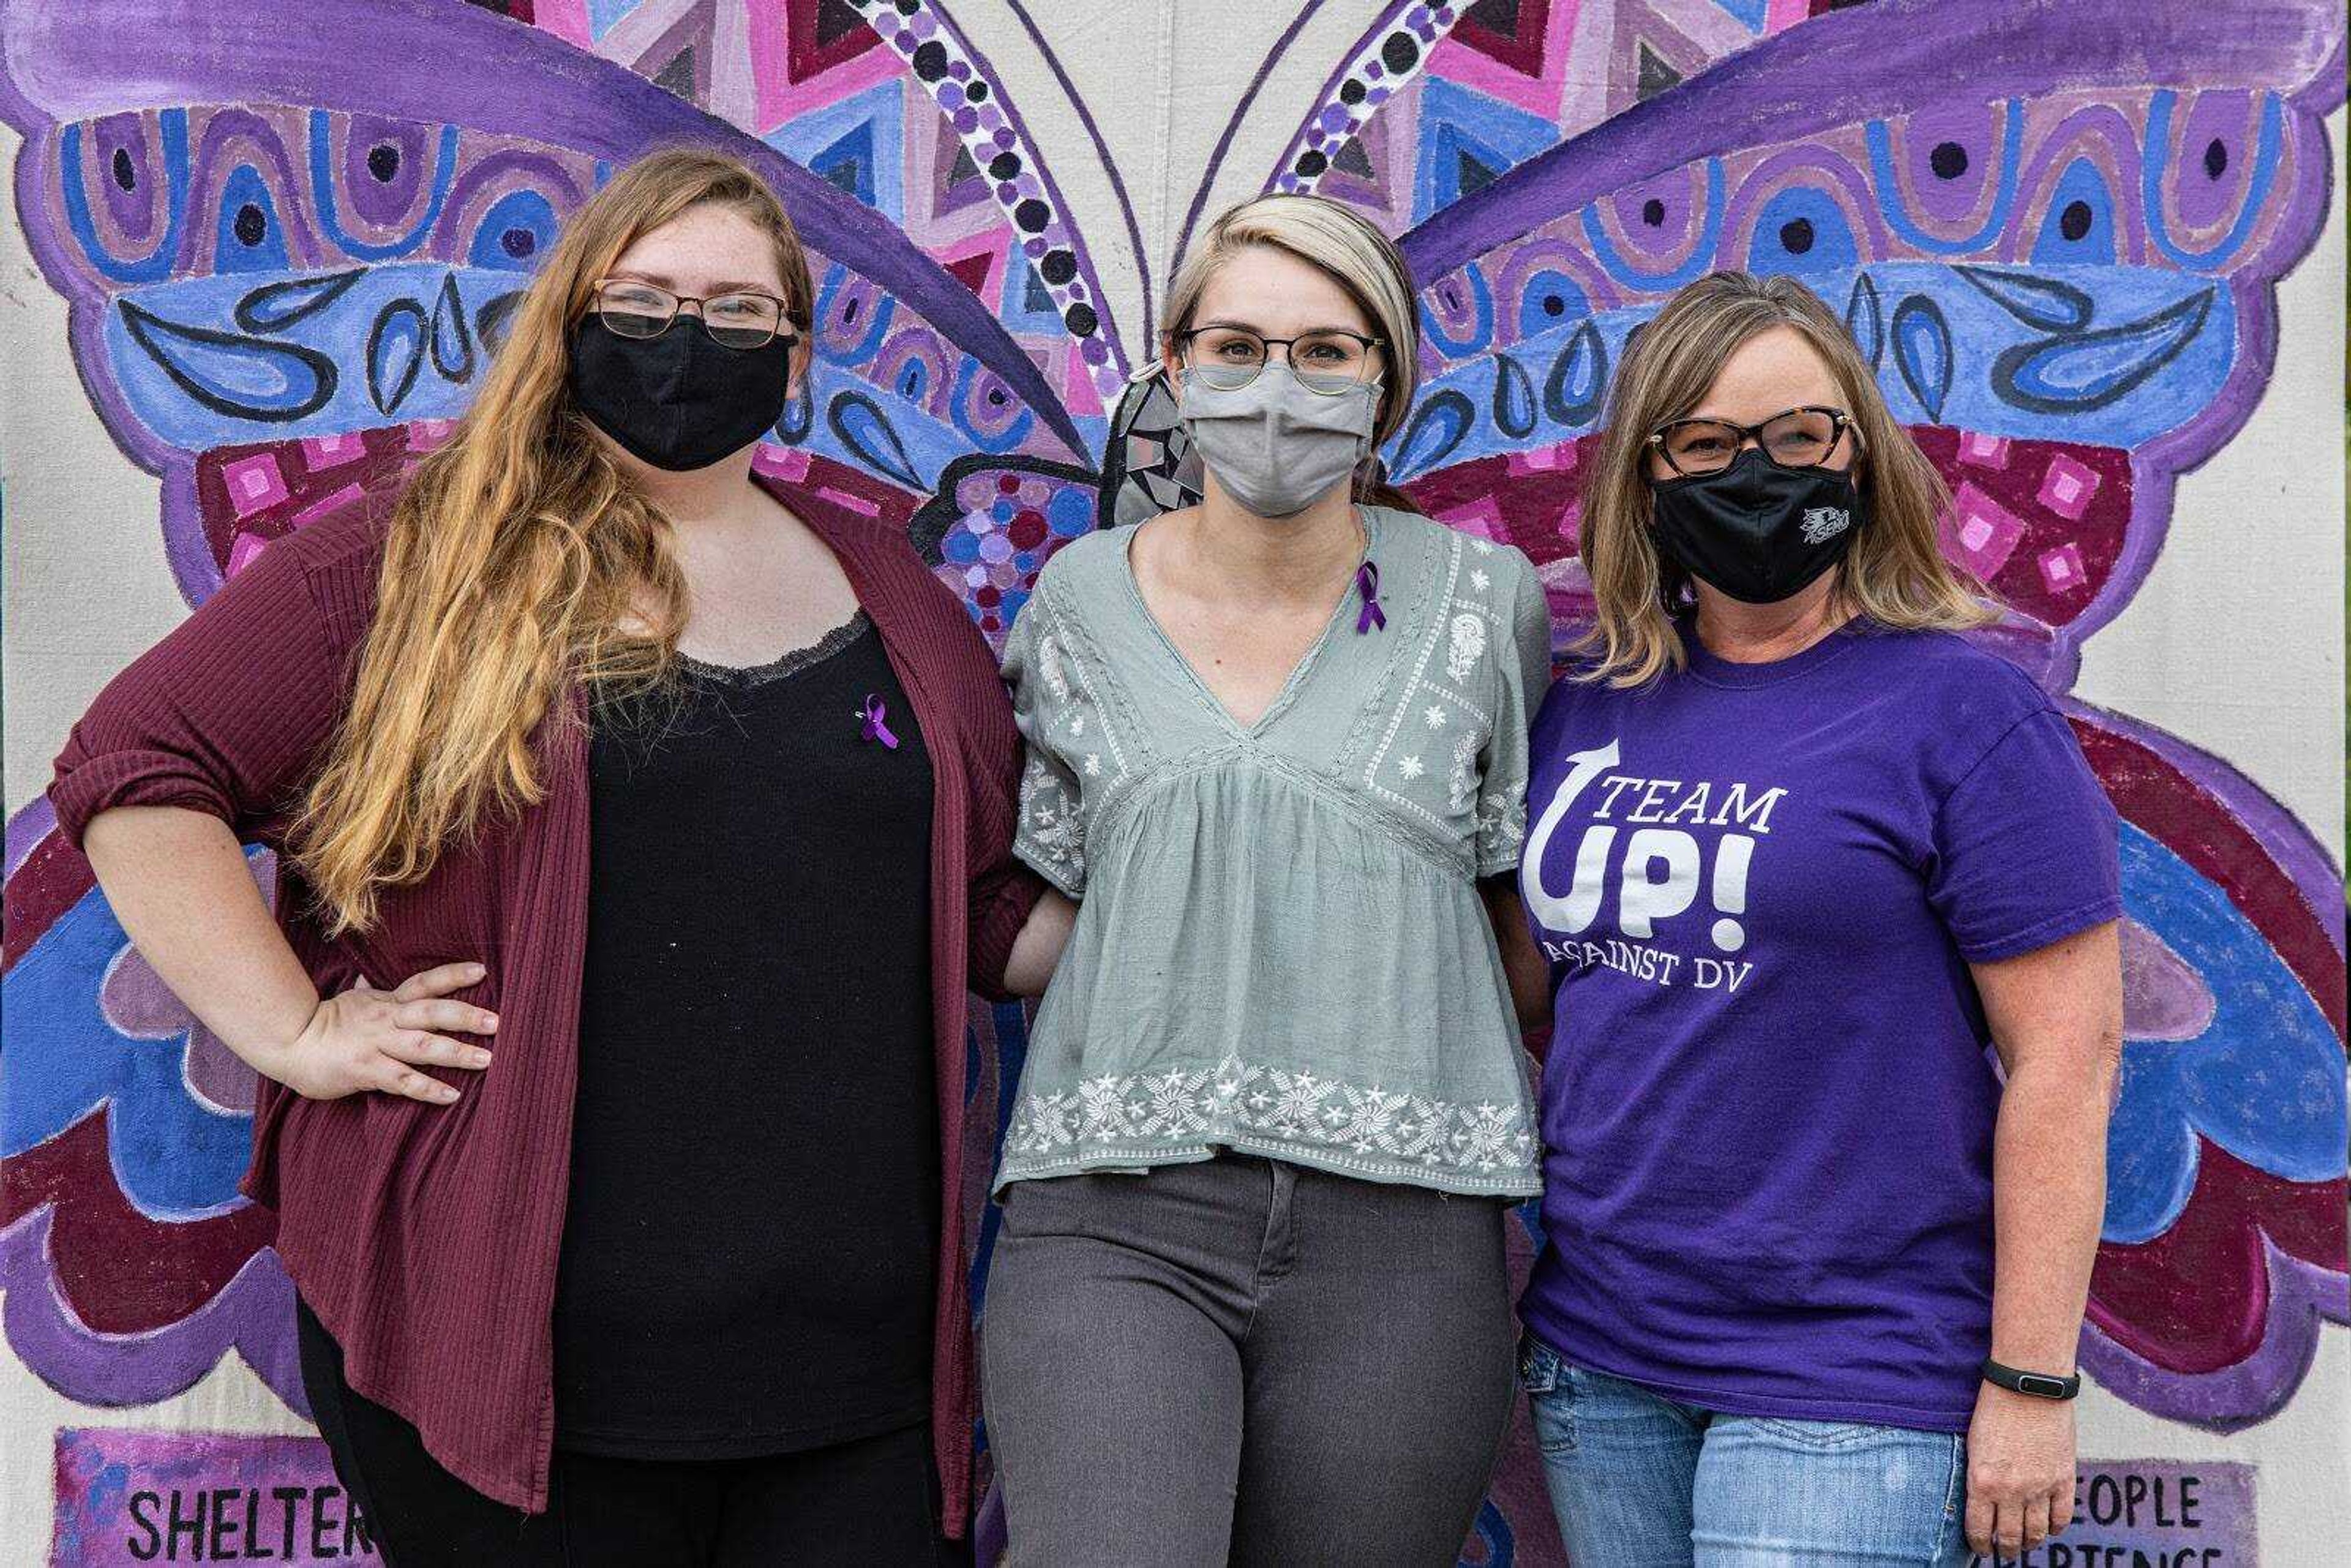 Sydney Tippitt- Lock (Left), Emily Heinlein (Middle) and Donna St. Sauver (Right), come together to display t-shirts decorated by survivors of domestic and dating violence in the campus community.